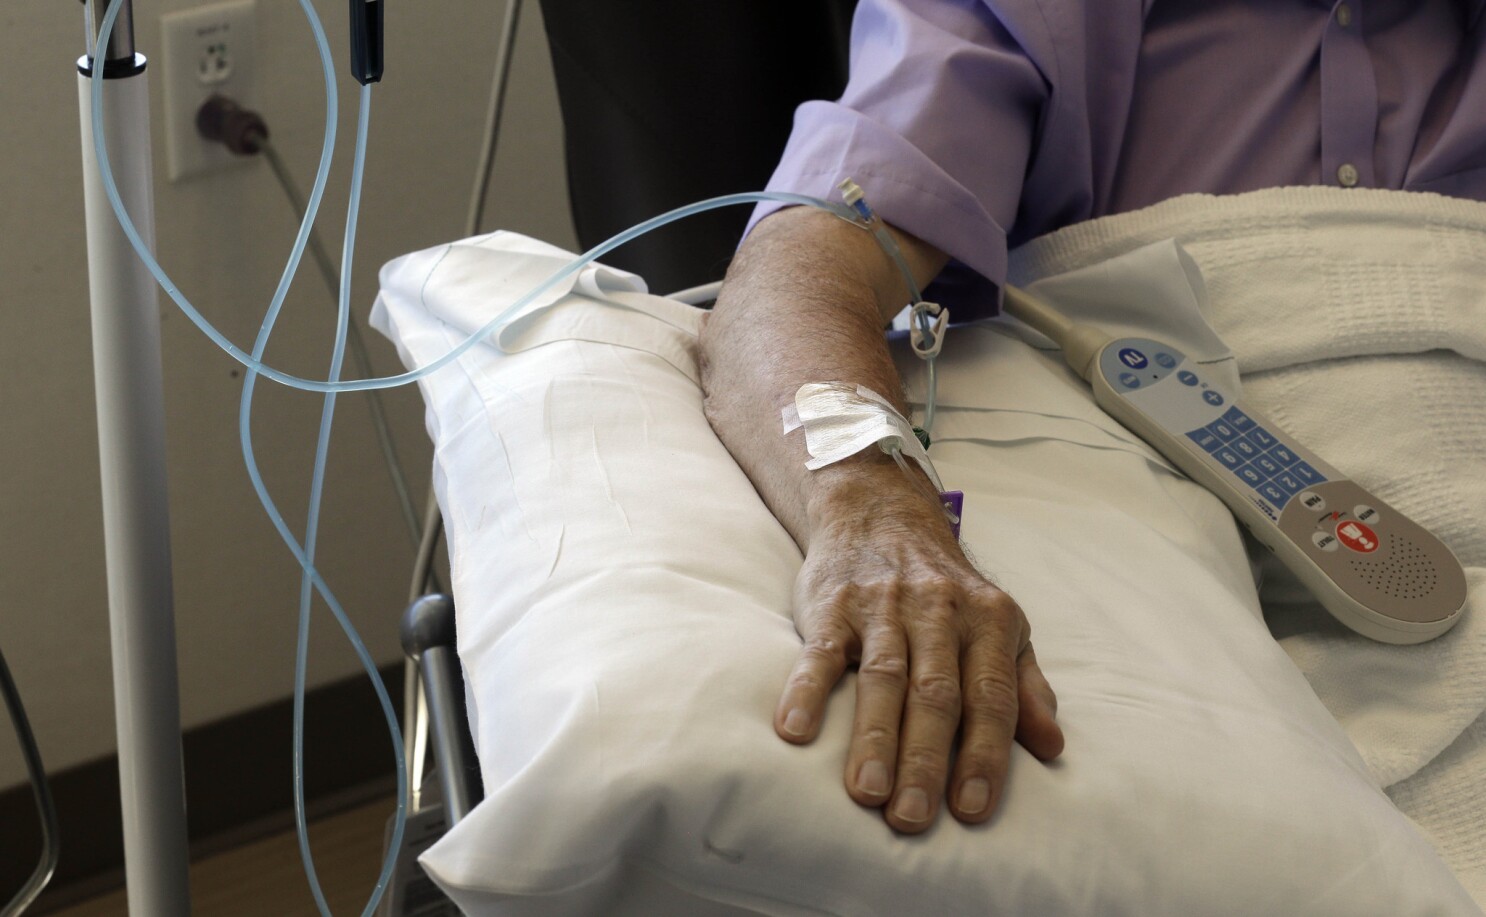 As death nears, chemotherapy may do more harm than good - Los Angeles Times